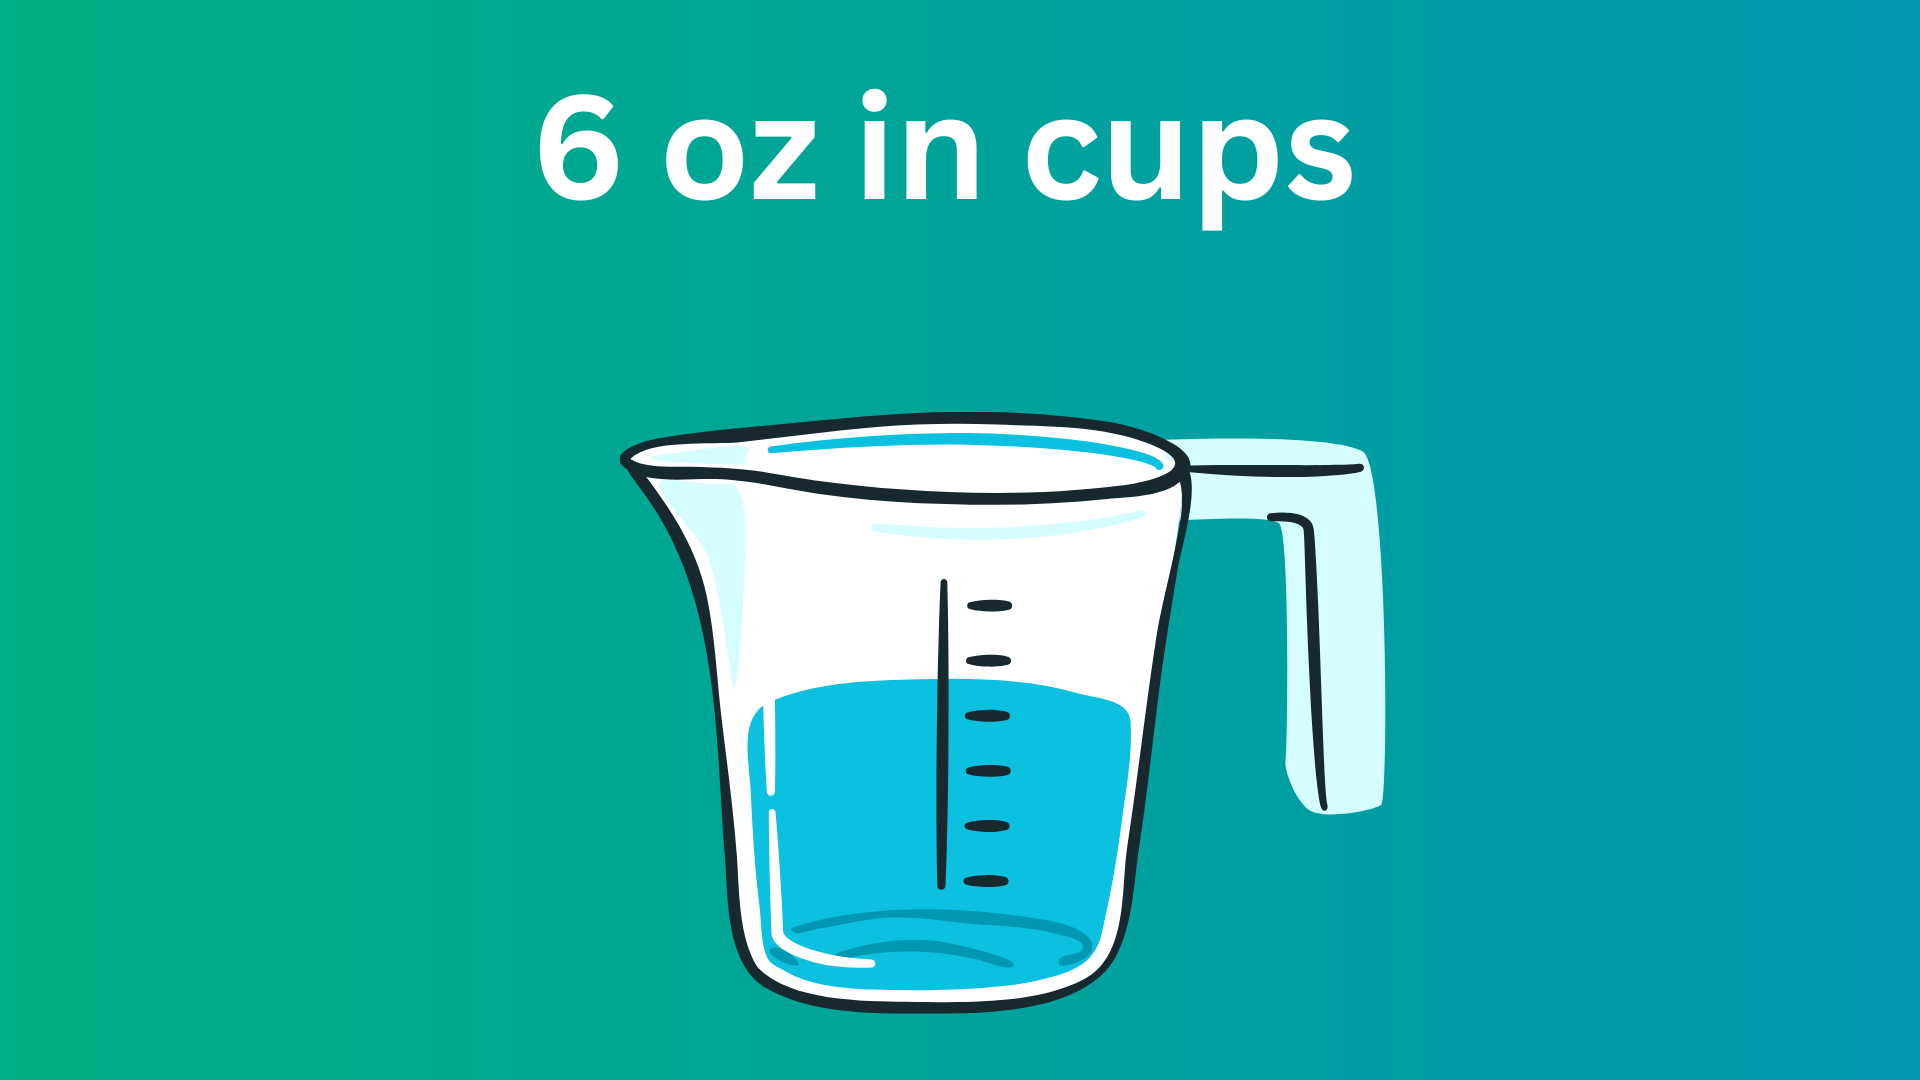 a measuring cup filled with water with text "6 oz in cups" written on top